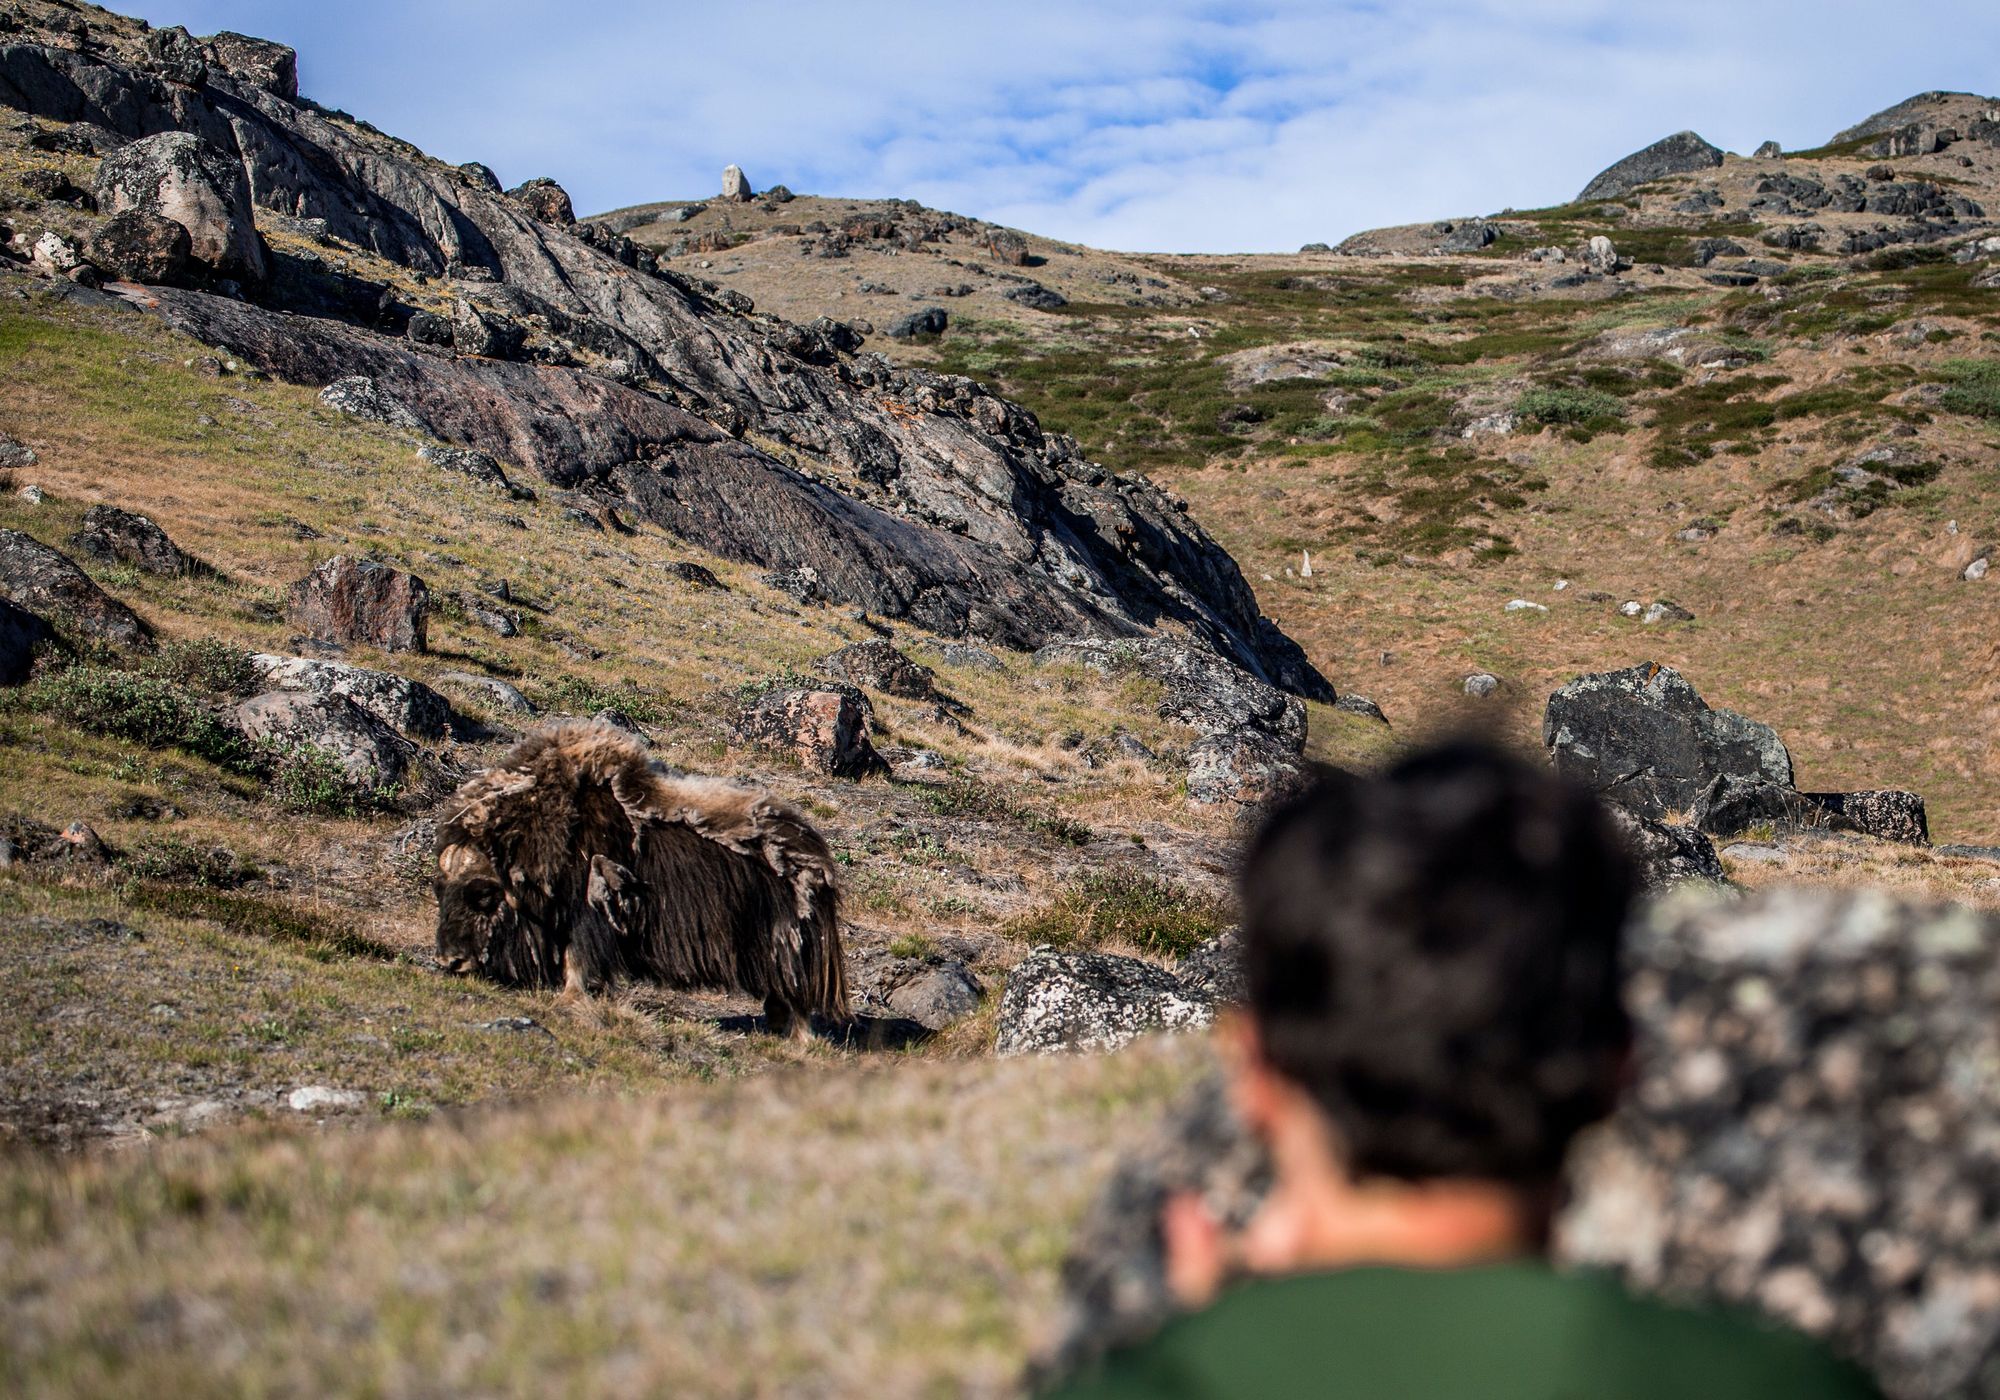 The musk oxen of western Greenland.